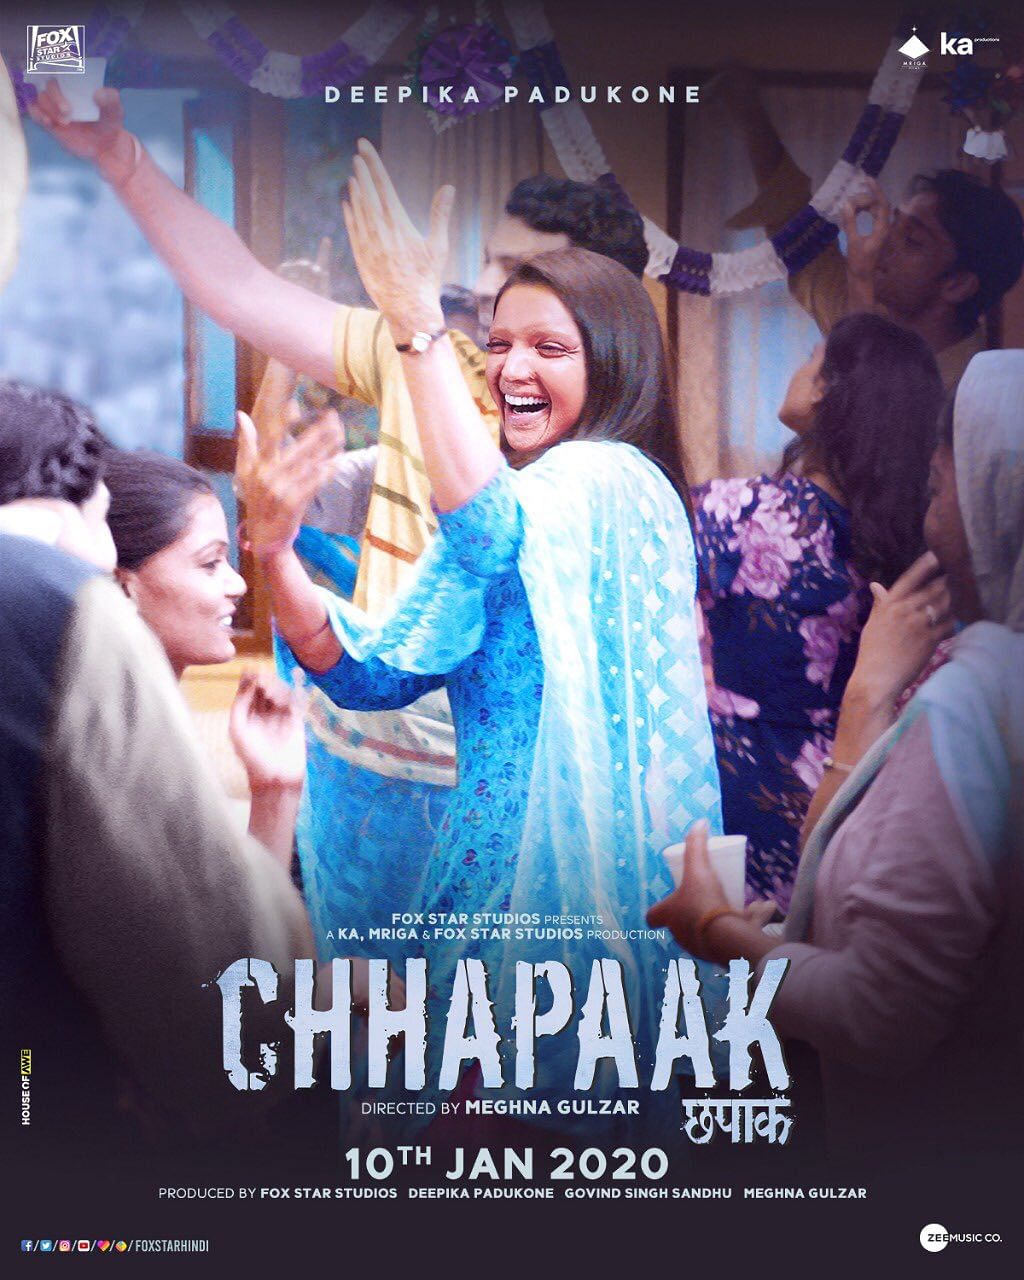 The film is brilliant when it comes to providing insights into the life of acid attack survivors, portraying their vulnerability no matter how much time has passed or how many successes they have achieved post the attack. Credit: Twitter (@deepikapadukone)